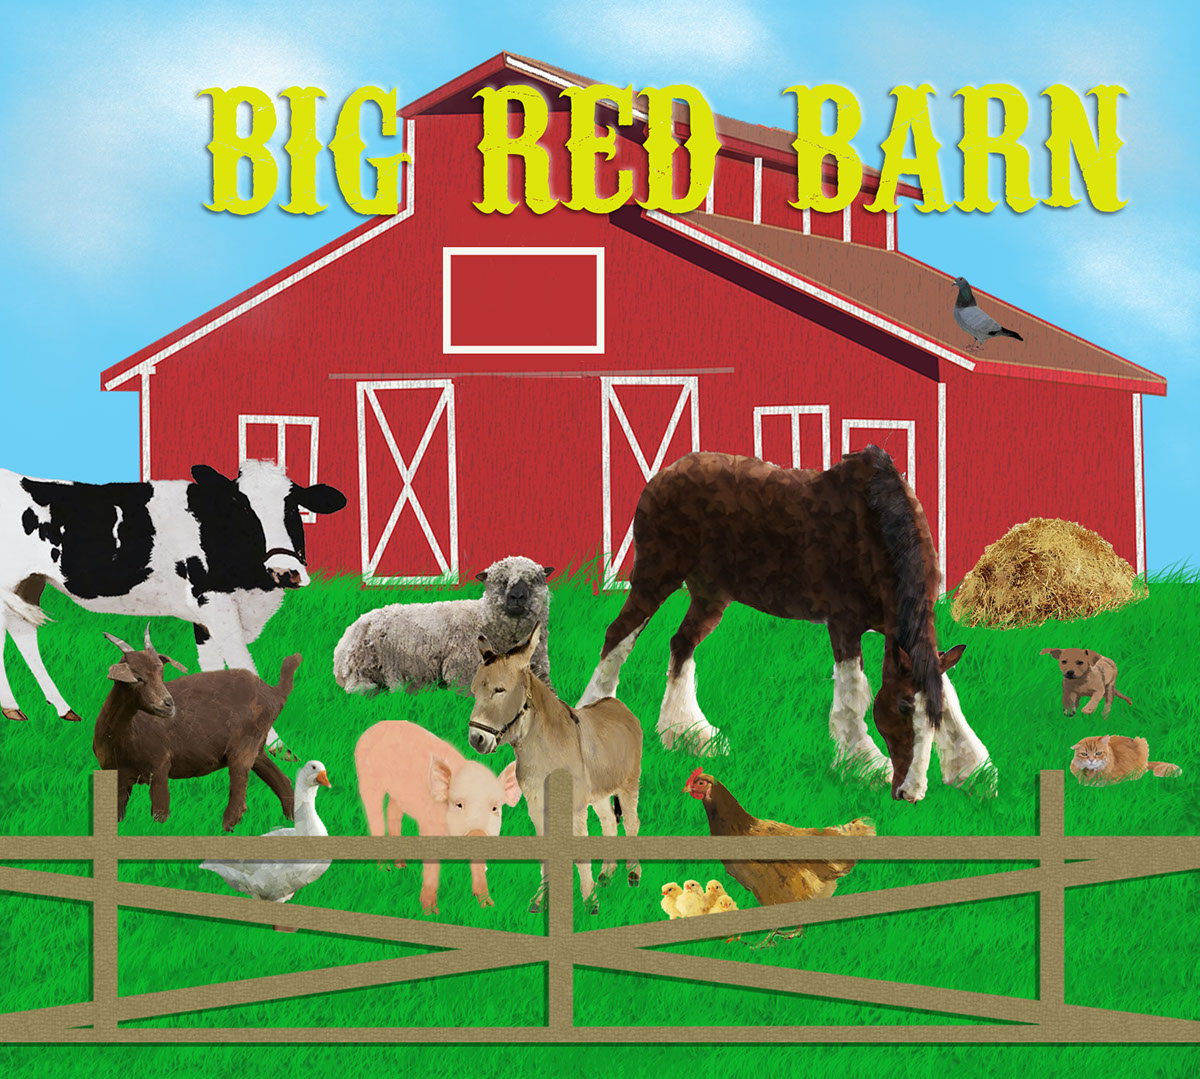 barn Big Red Barn photoshop book cover Book mock up